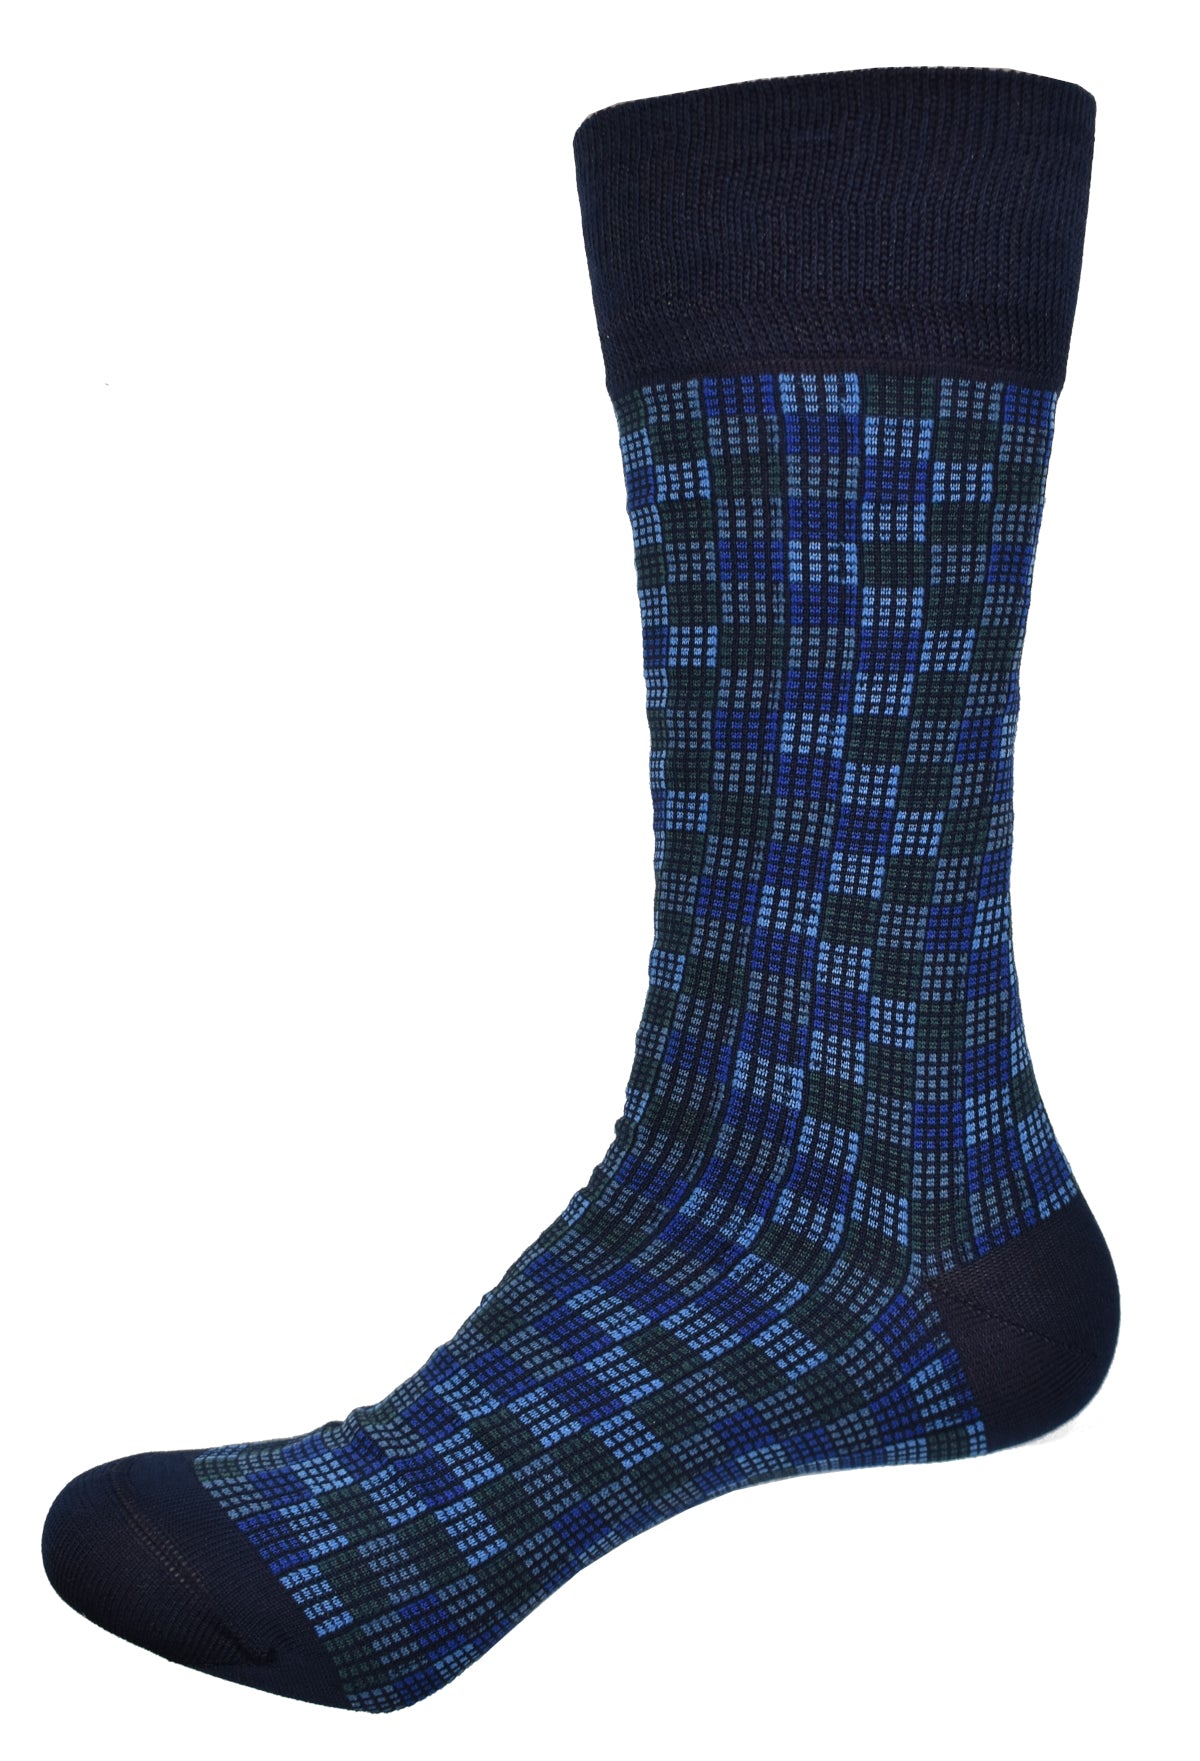 Introducing the ZV1556N - a navy multi checkerboard crafted from rich mercerized cotton and enhanced with lycra for remarkable comfort and stretch. Unwind in style with this outstanding geometric pattern and warm blue navy tones!  Also available in Brown or Red  Fits size 9-11.